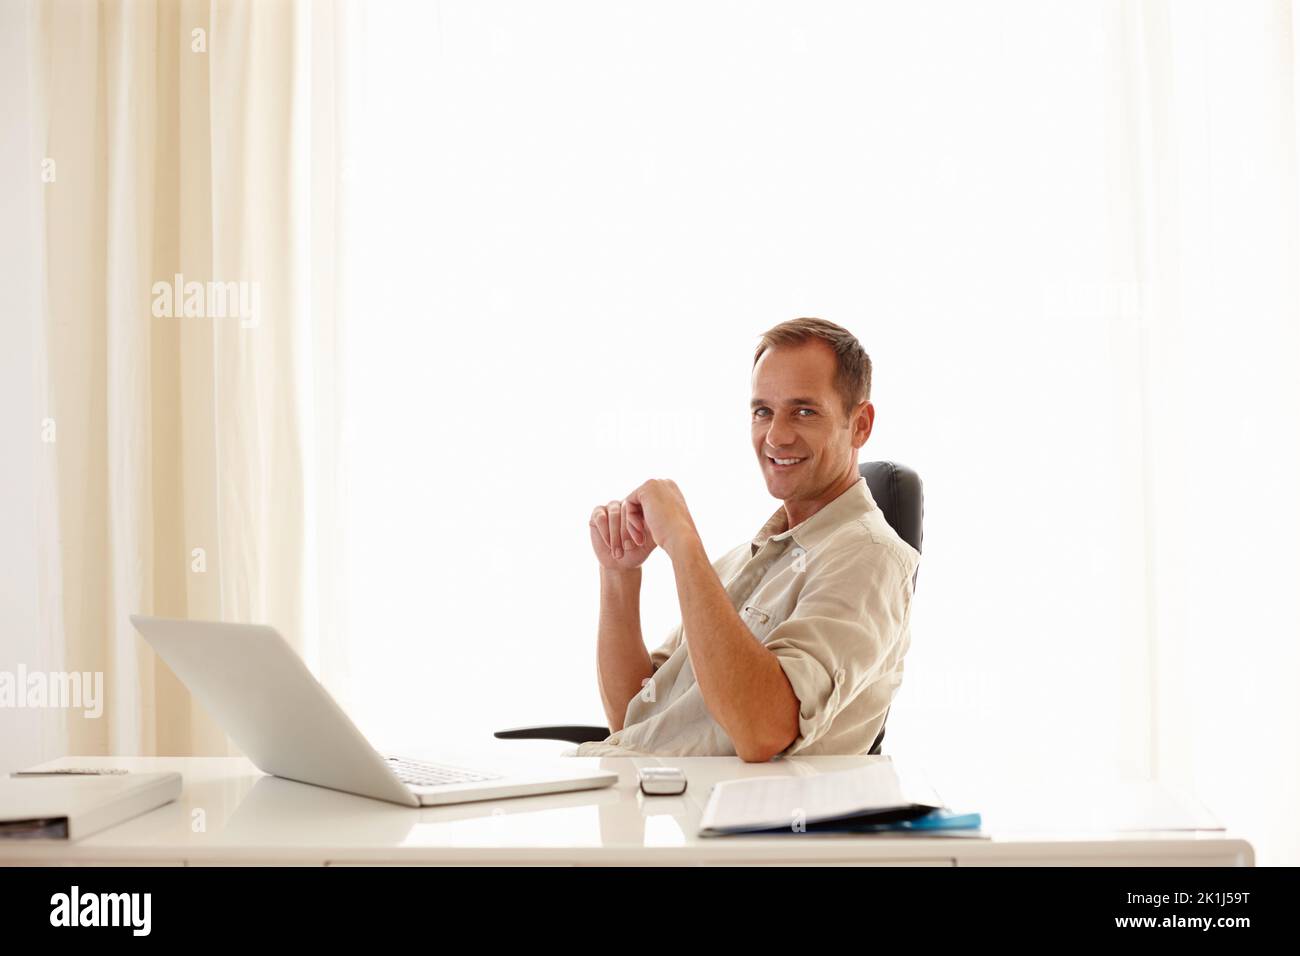 Comfort meets sophistication in this office. Mature businessman smiling confidently while working in an office. Stock Photo